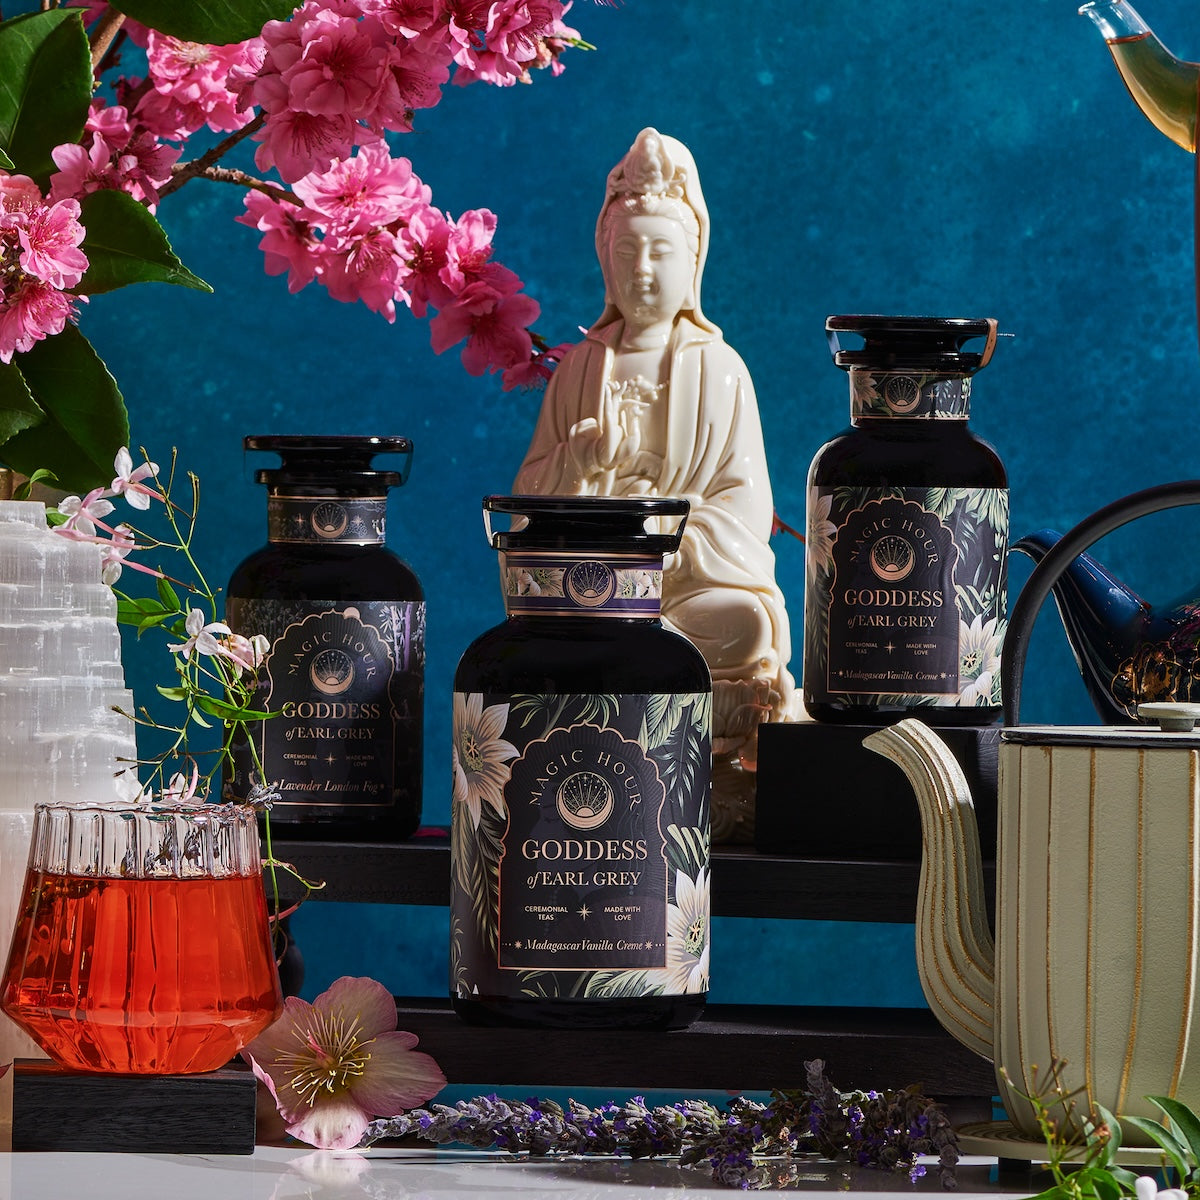 A serene tea setup featuring three "Goddess of Earl: Madagascar Vanilla Creme Tea for Soothing Delight & Delicious Decadence" tea jars from Magic Hour, a white statue, blooming pink flowers, a white striped teapot, and a glass of black tea on a wooden table. A calming blue backdrop enhances the tranquil scene.